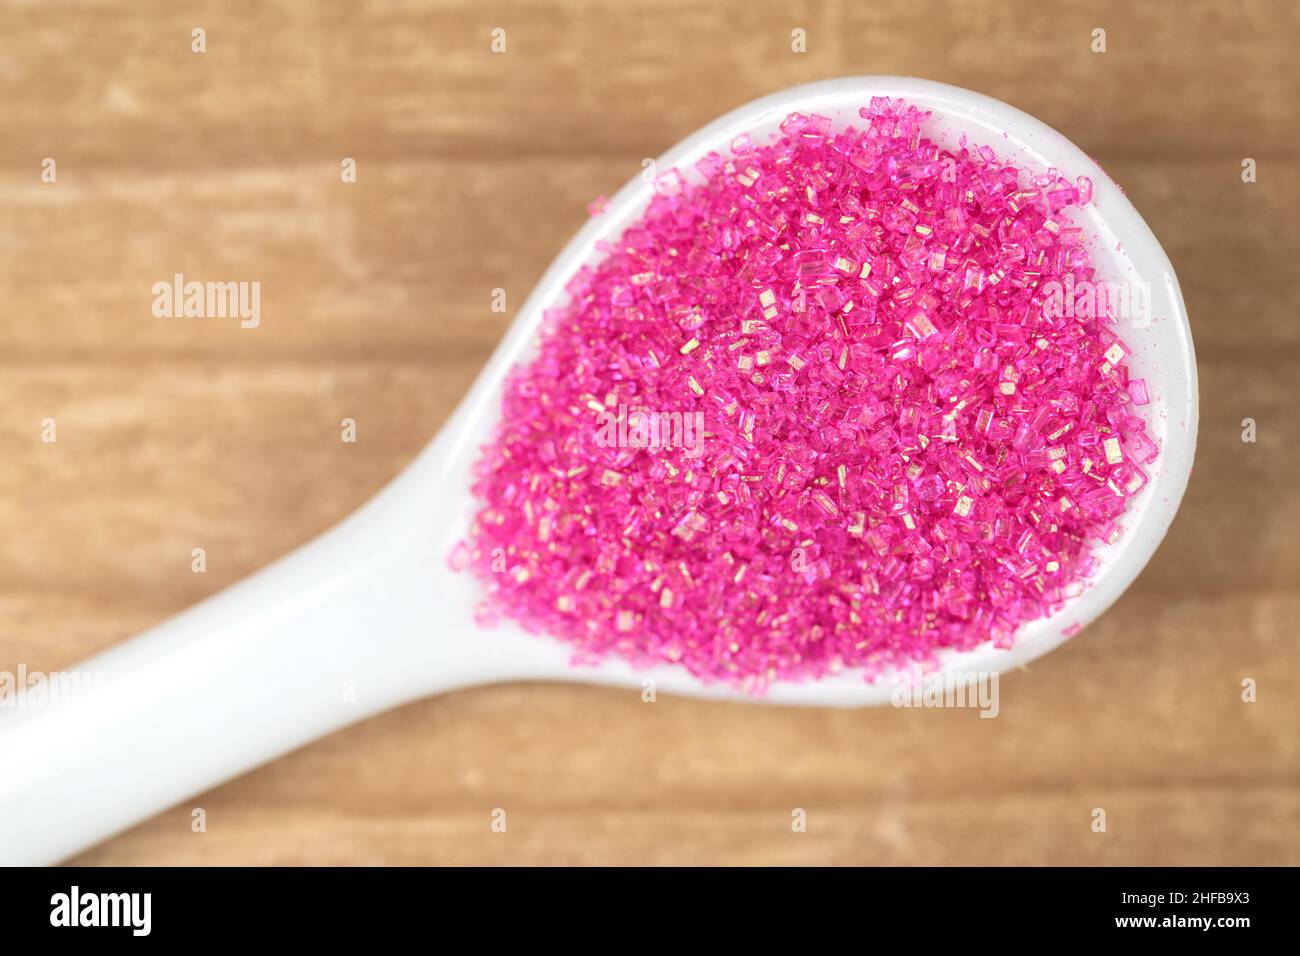 Confectionary pink sugar in a white spoon Stock Photo